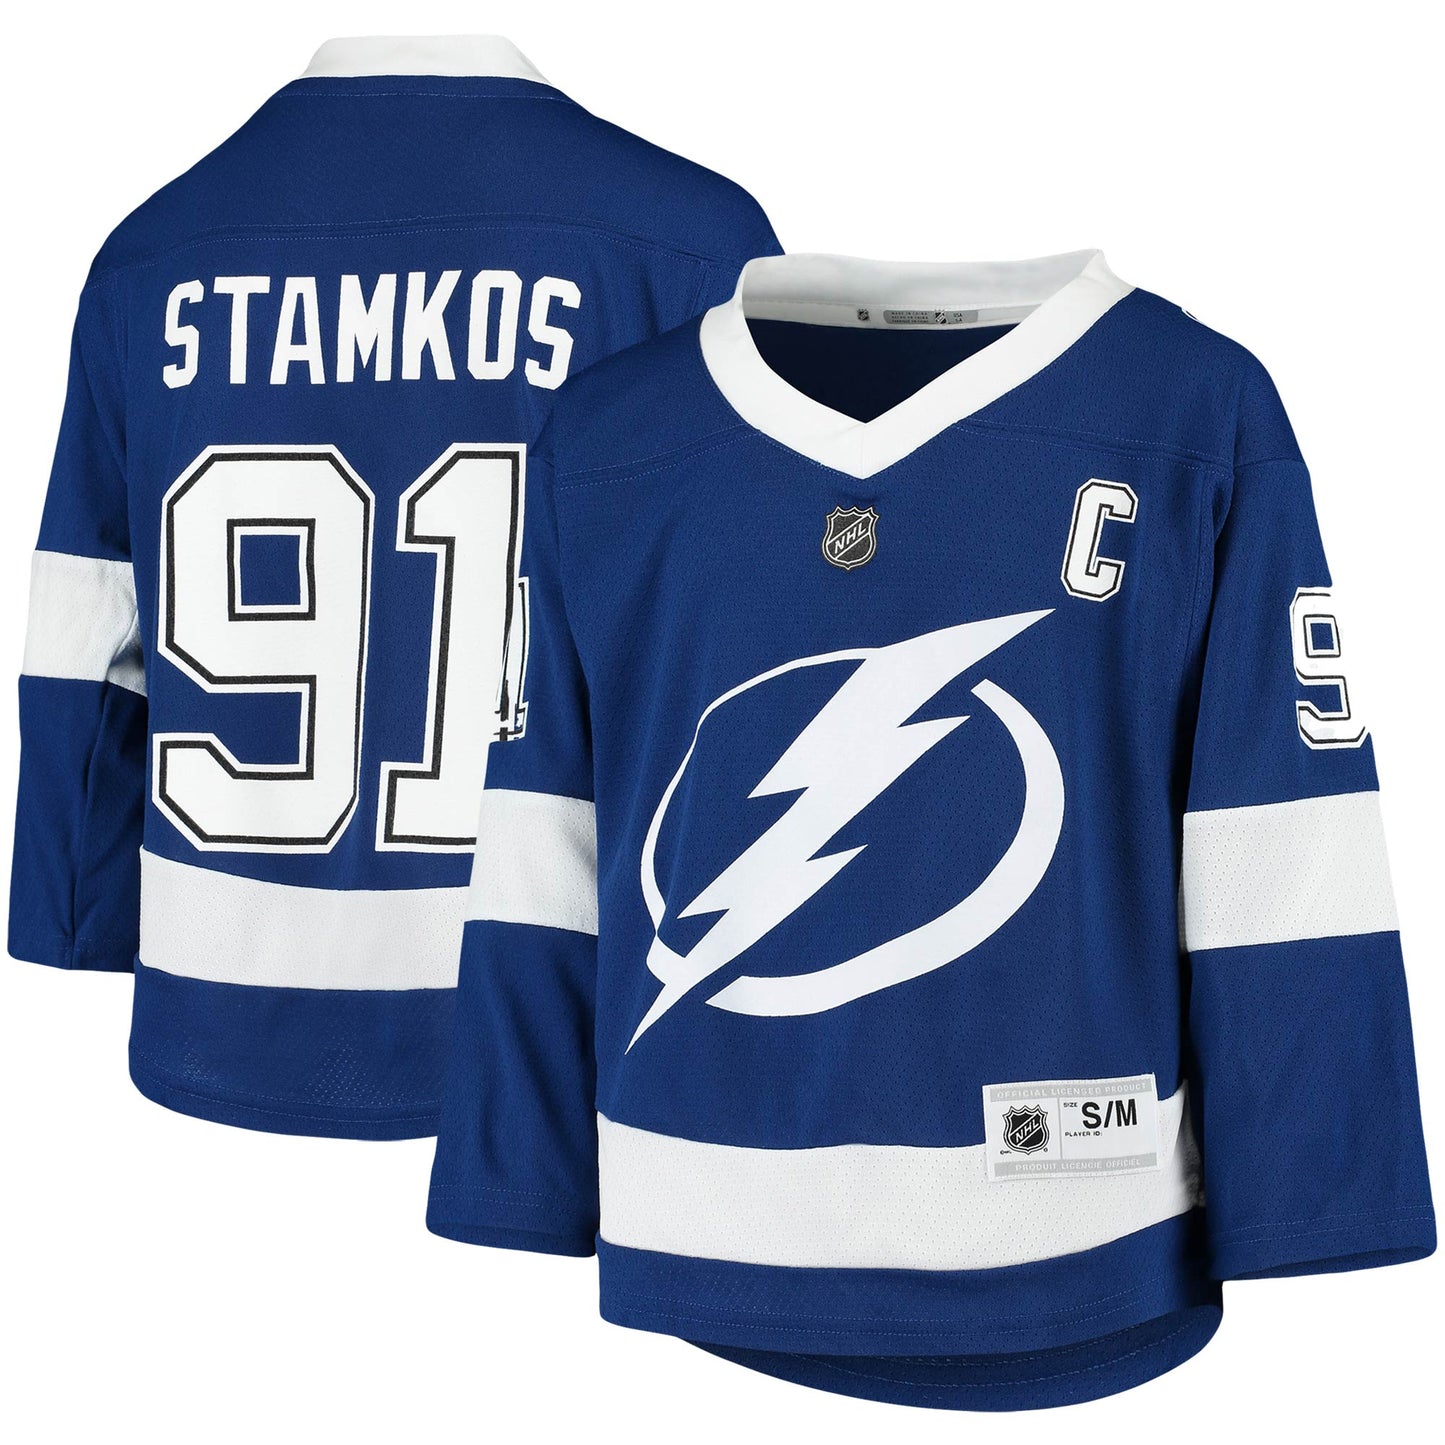 Steven Stamkos Tampa Bay Lightning Youth Home Replica Player Jersey - Blue